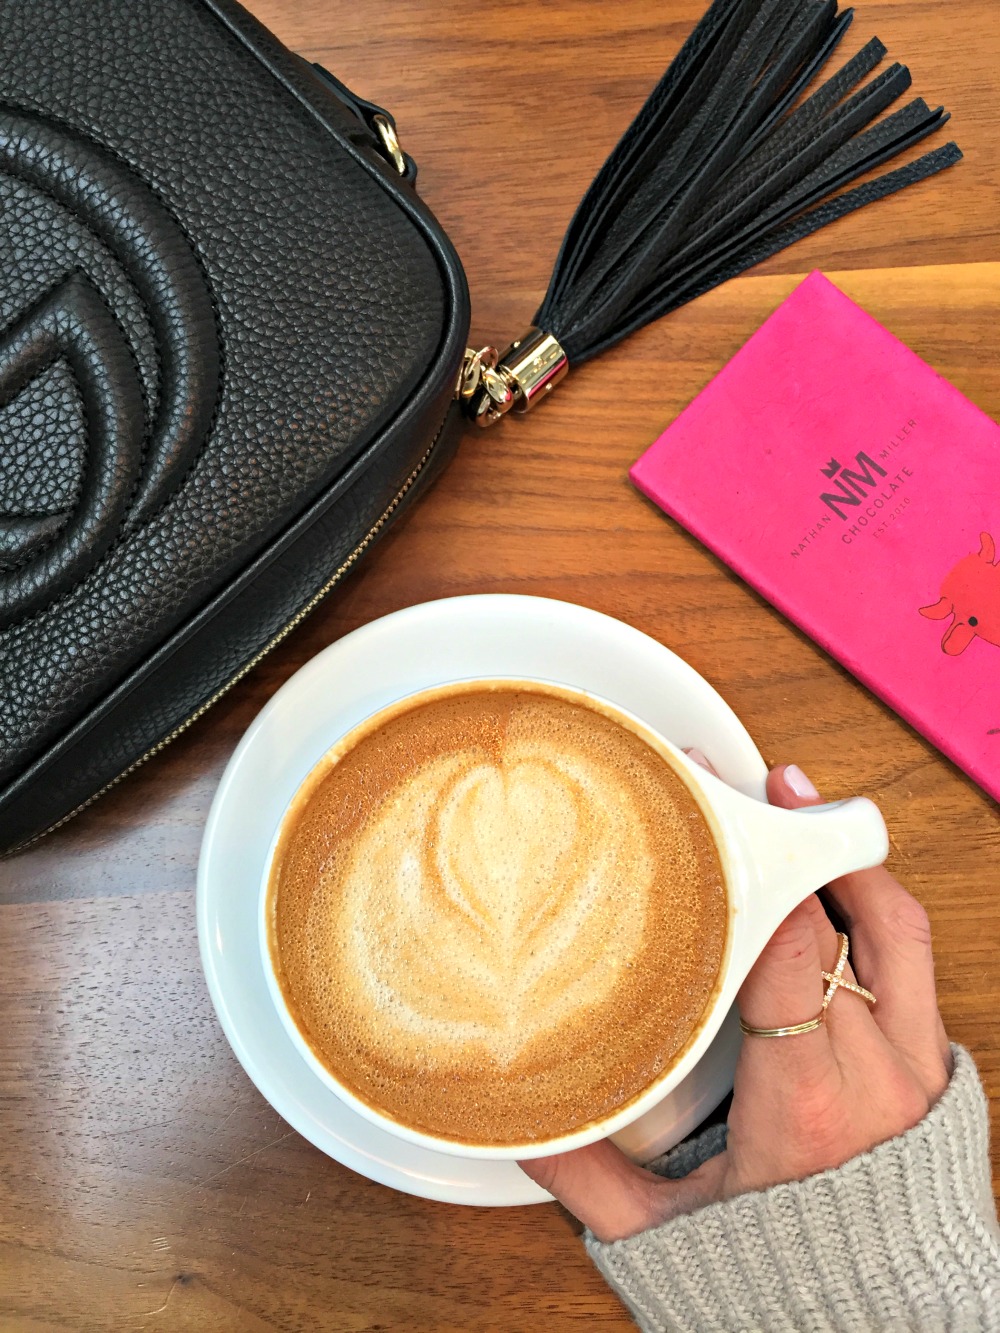 Serious coffee situatoin at Barista Parlor // hat to Eat, See & Do in Nashville - Ultimate Girls Weekend in Nashville by popular Florida lifestyle blogger The Modern Savvy